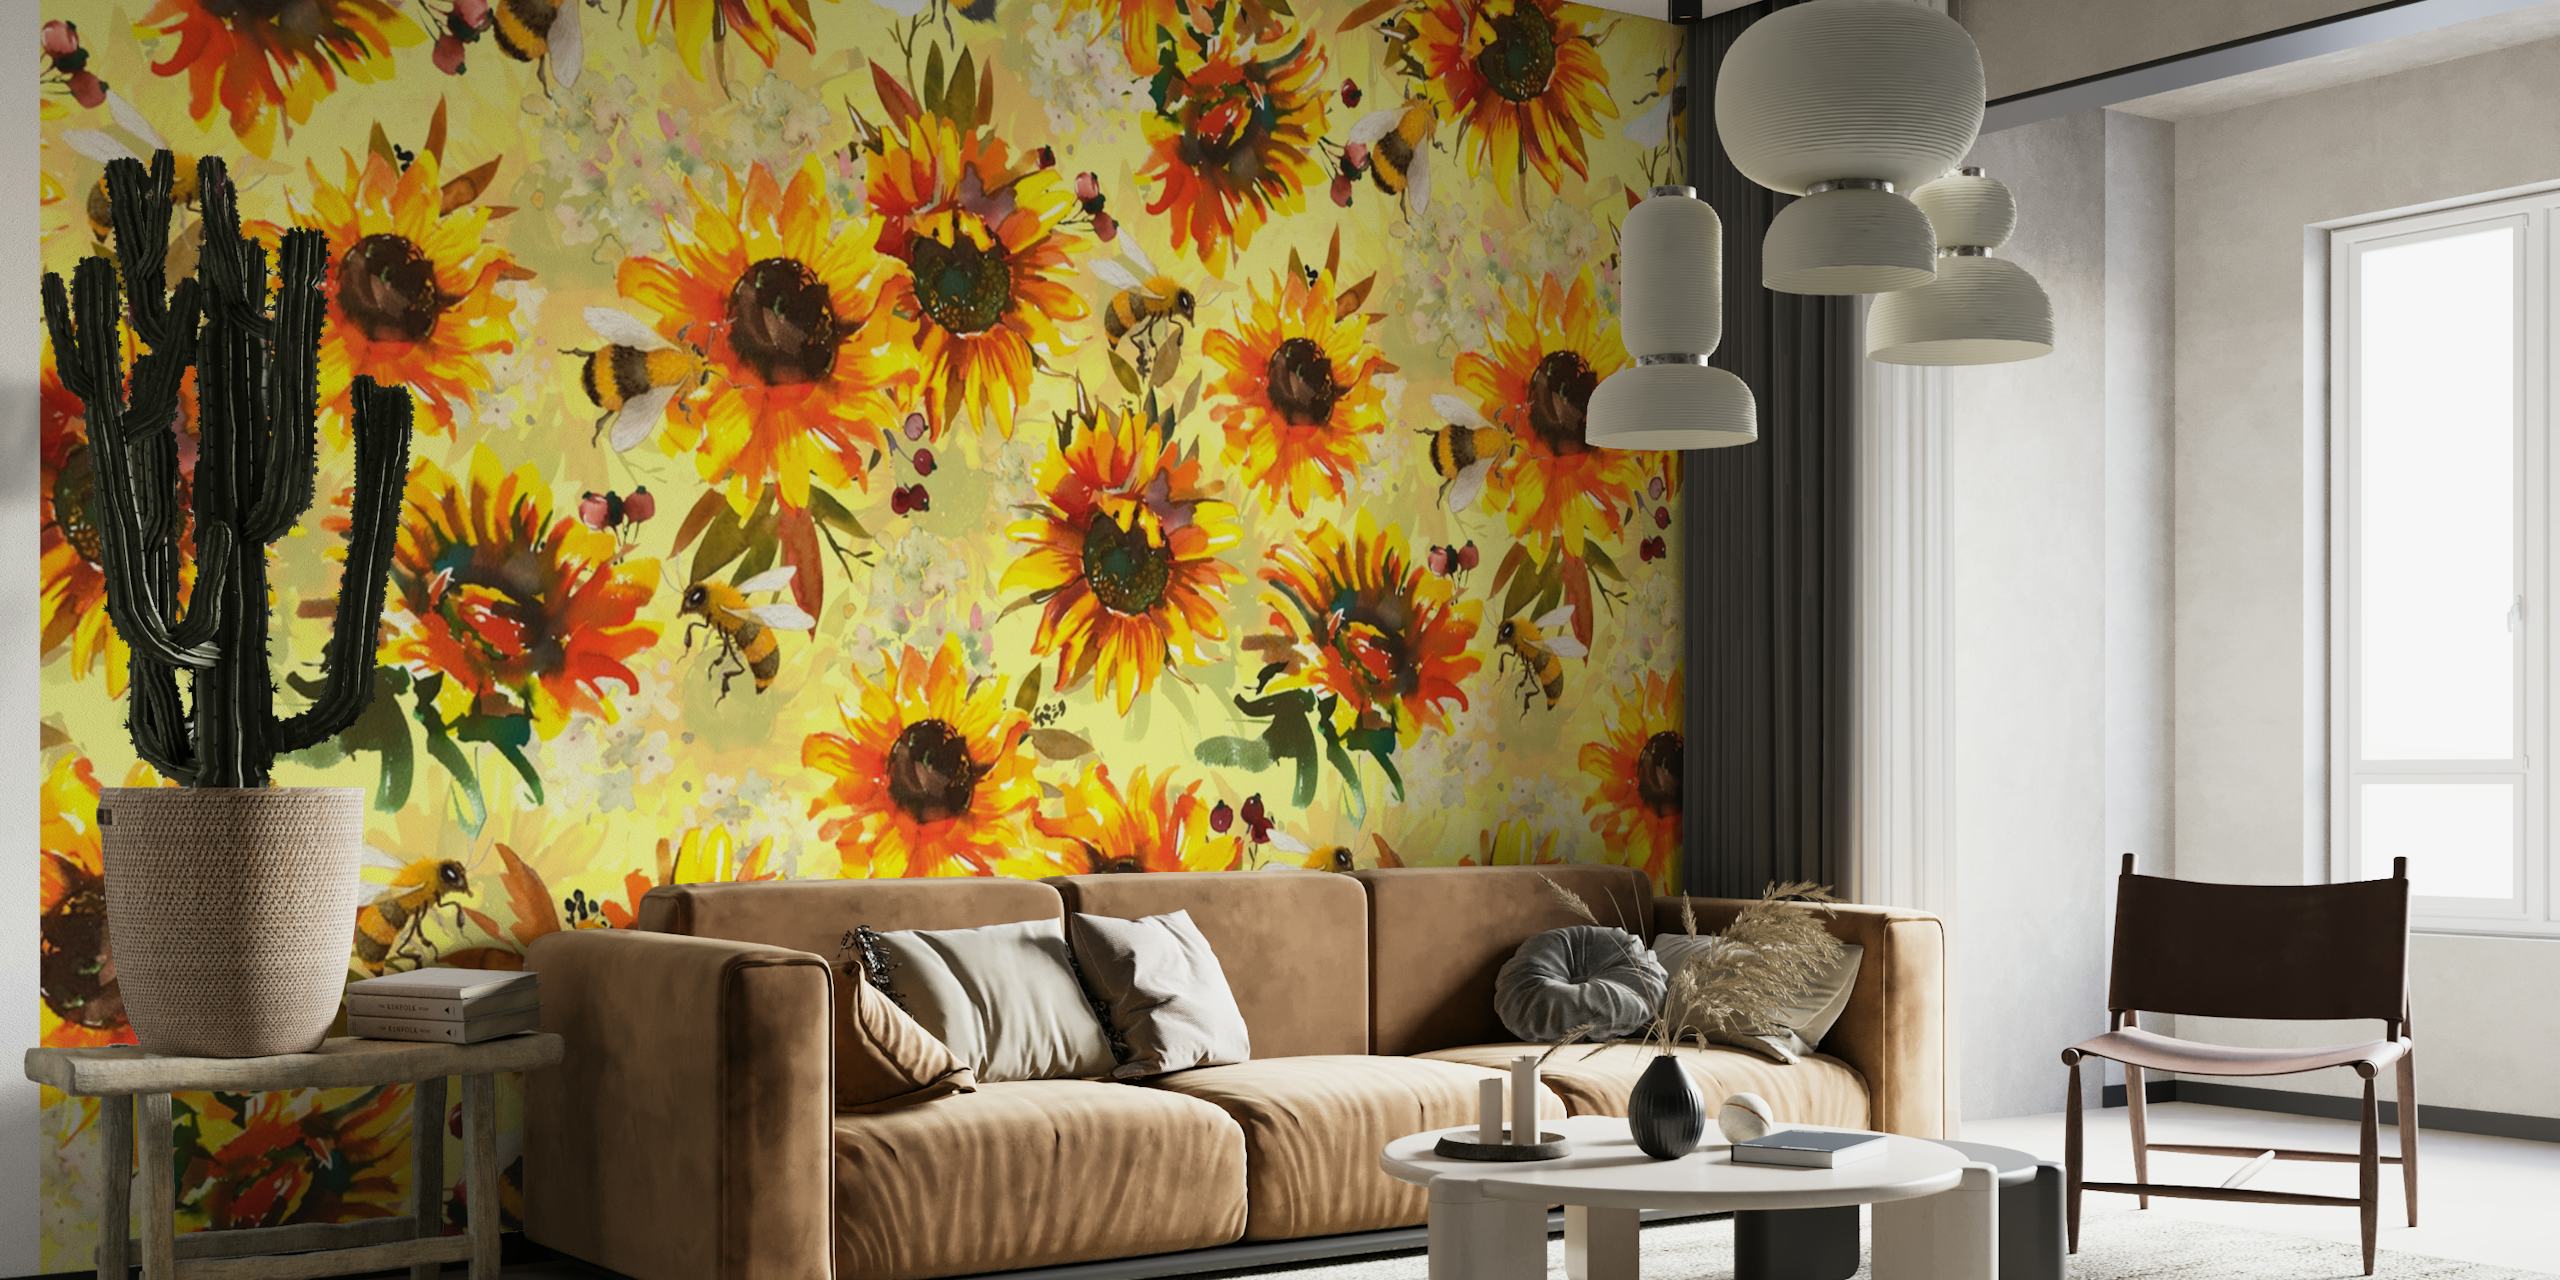 Sunflowers and bees pattern on a wall mural with a bright, summery feel.